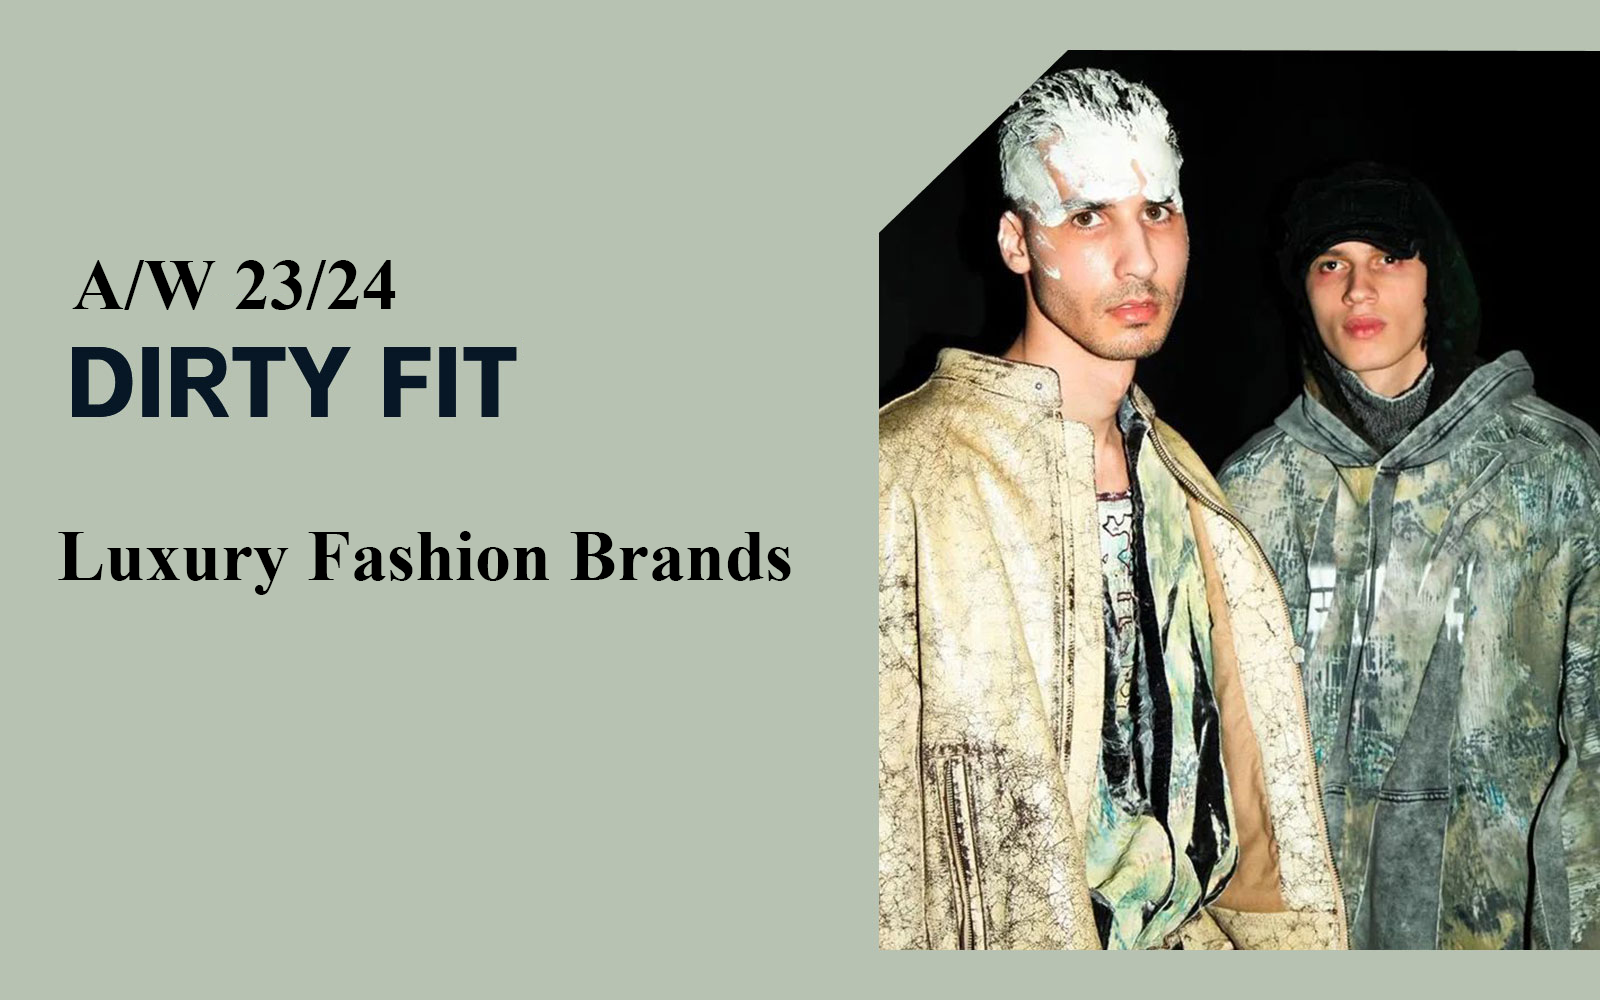 Dirty Fit Fashion -- The Comprehensive Analysis of Luxury Fashion Brand